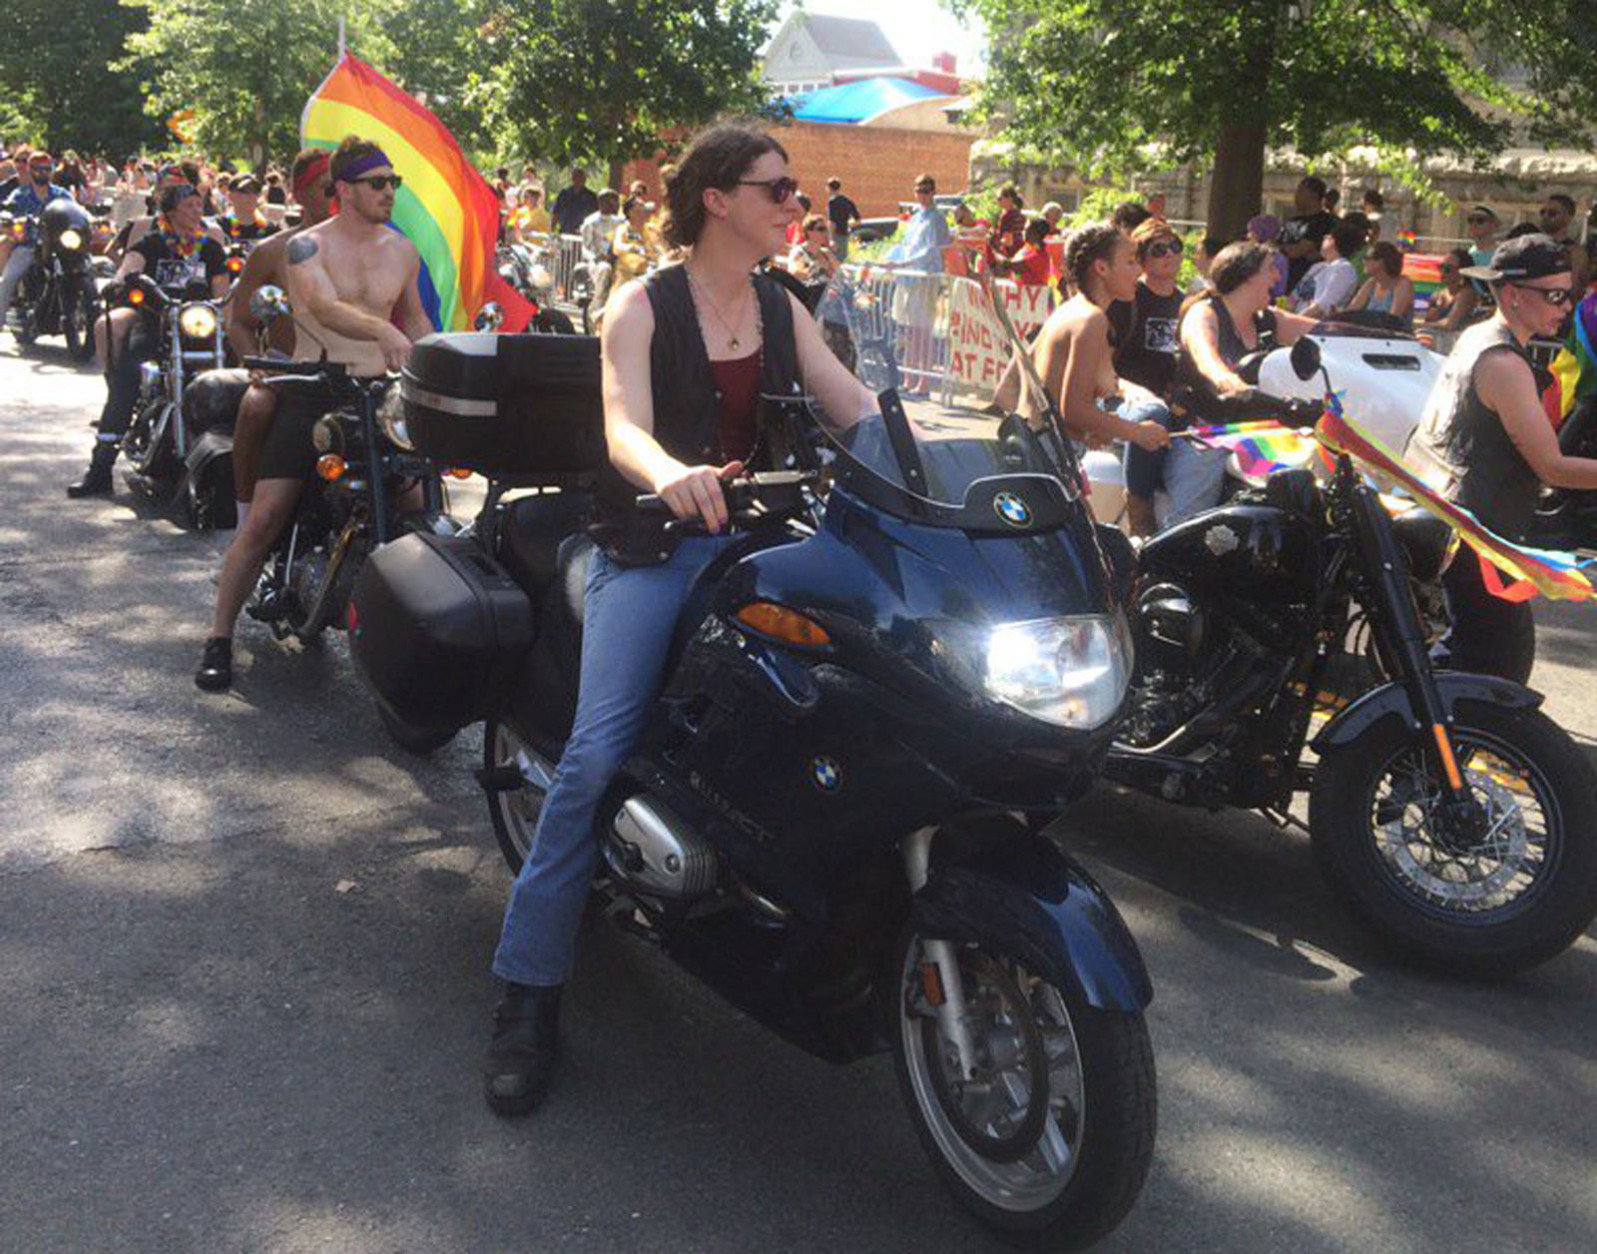 when is the gay pride parade 2016 in chicago